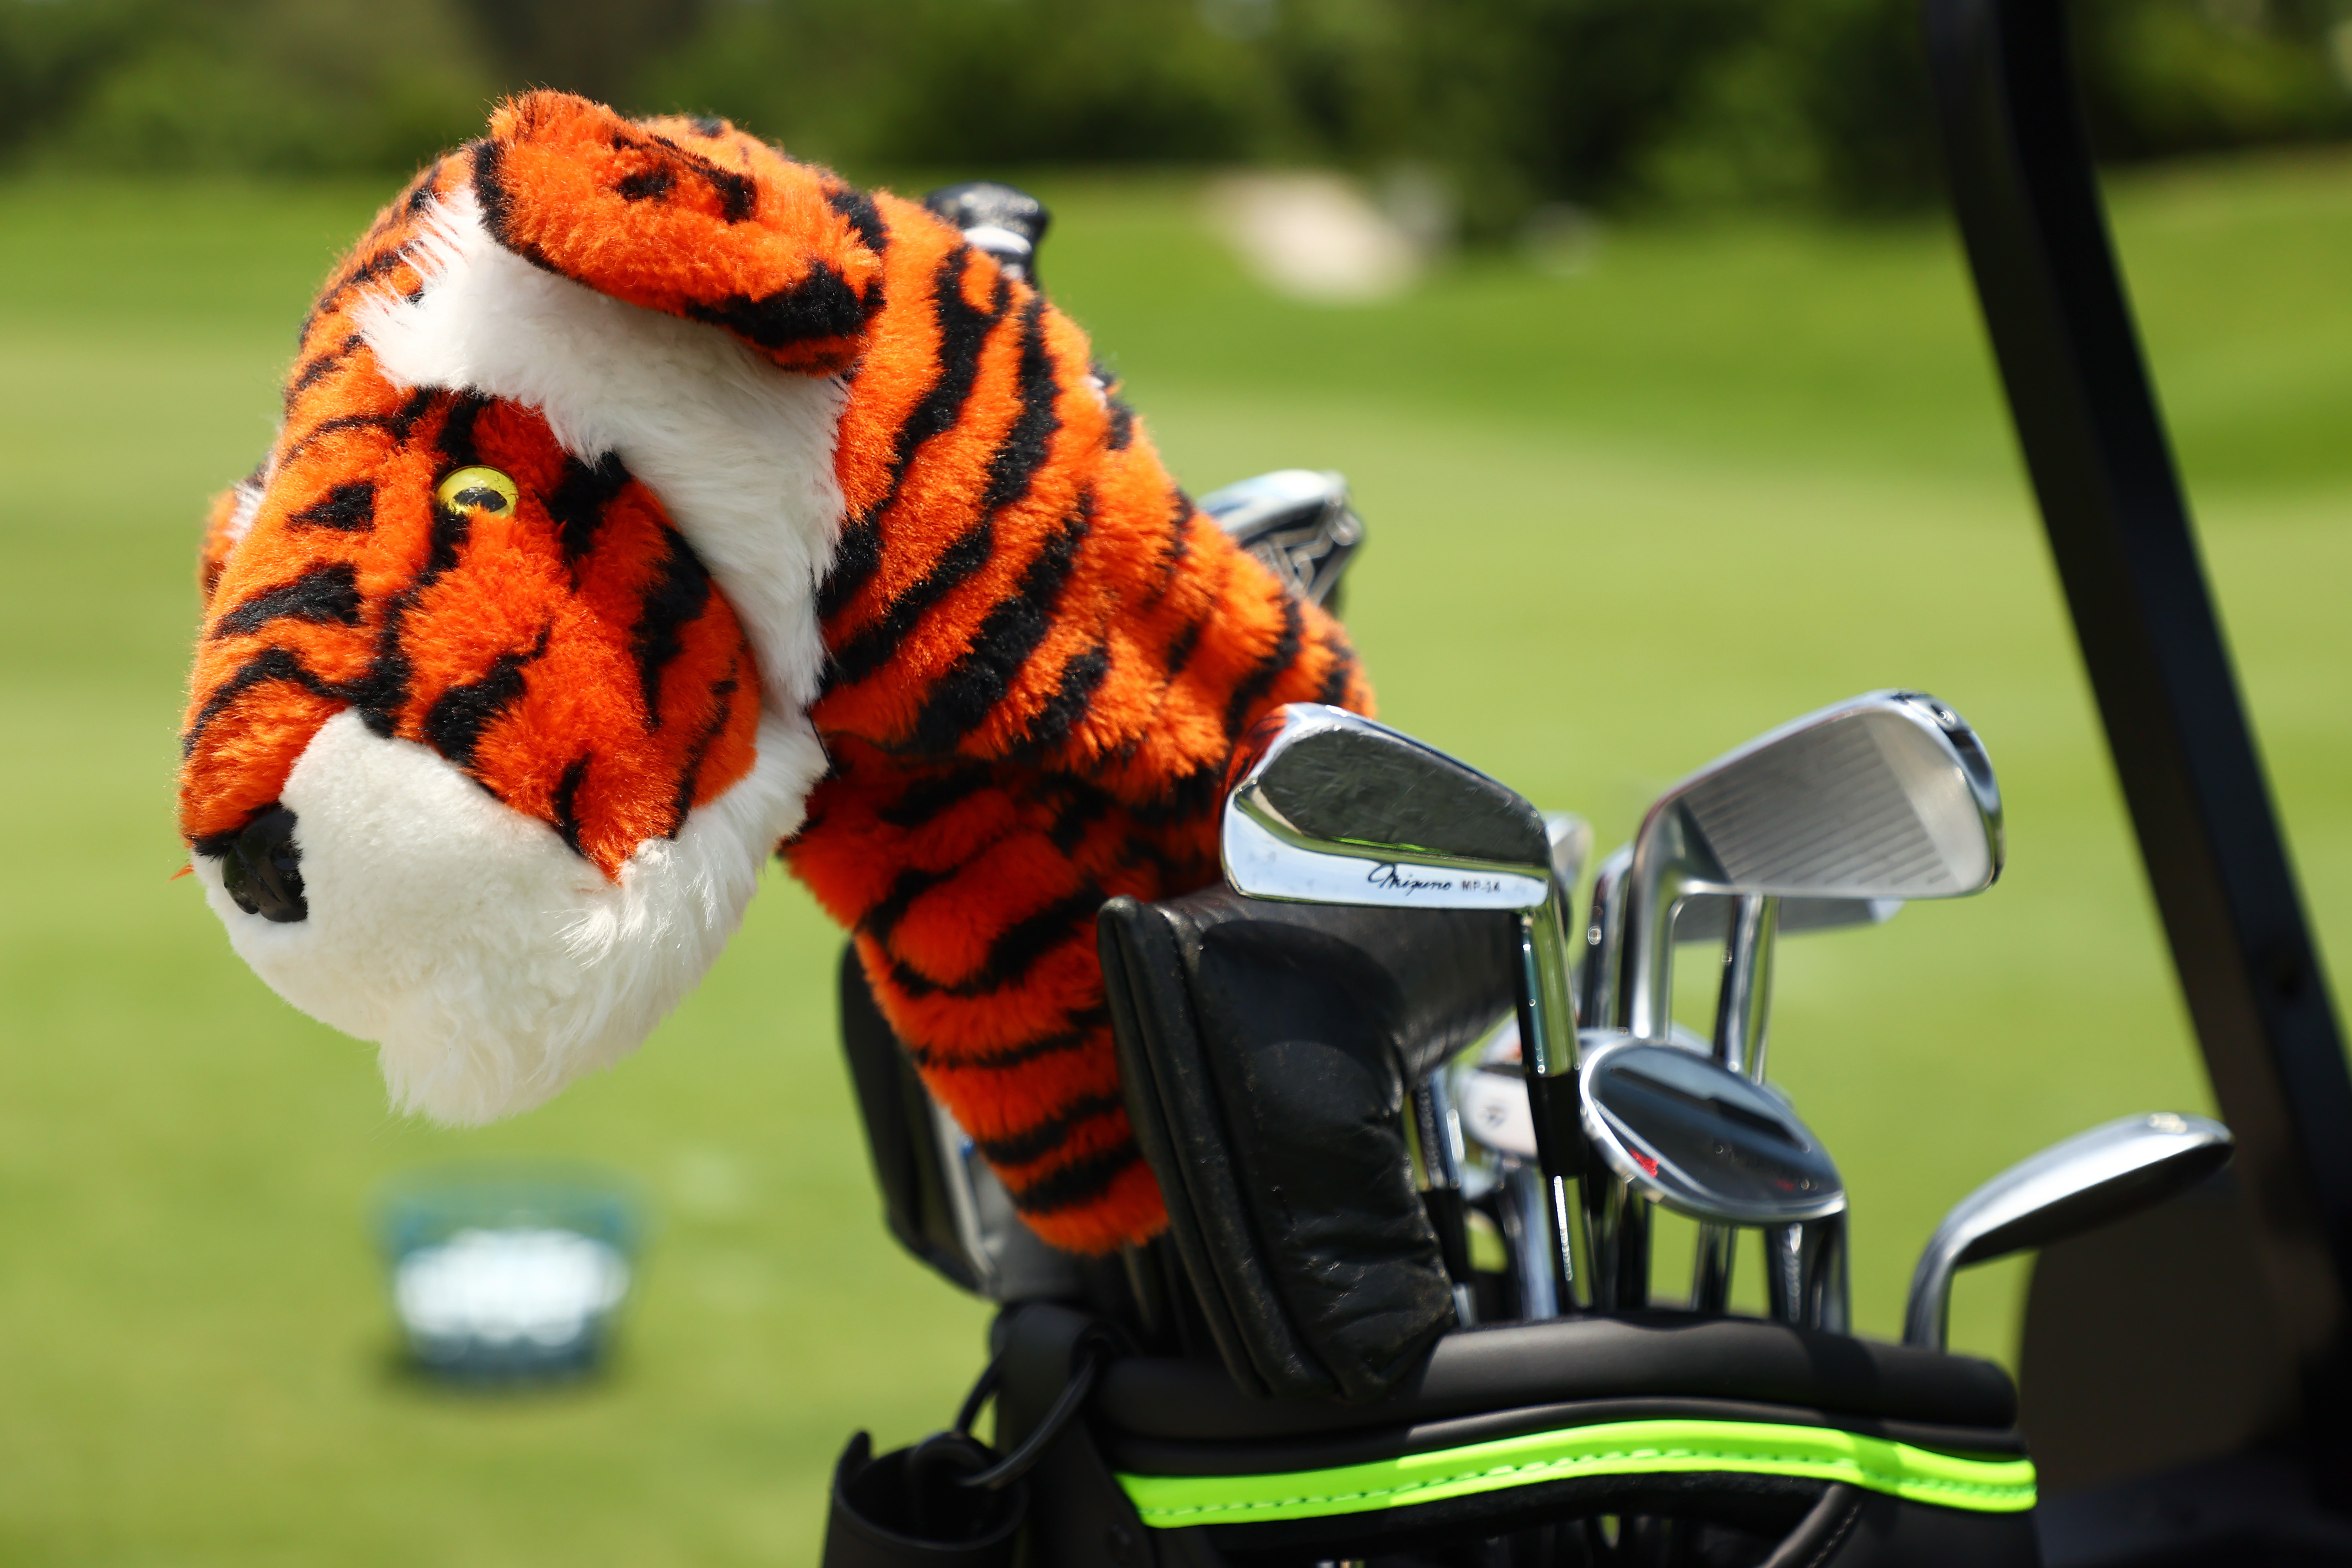 Here Are All The Clubs Tiger Woods Phil Mickelson Peyton Manning And Tom Brady Are Using For The Match At Medalist Golf News And Tour Information Golfdigest Com